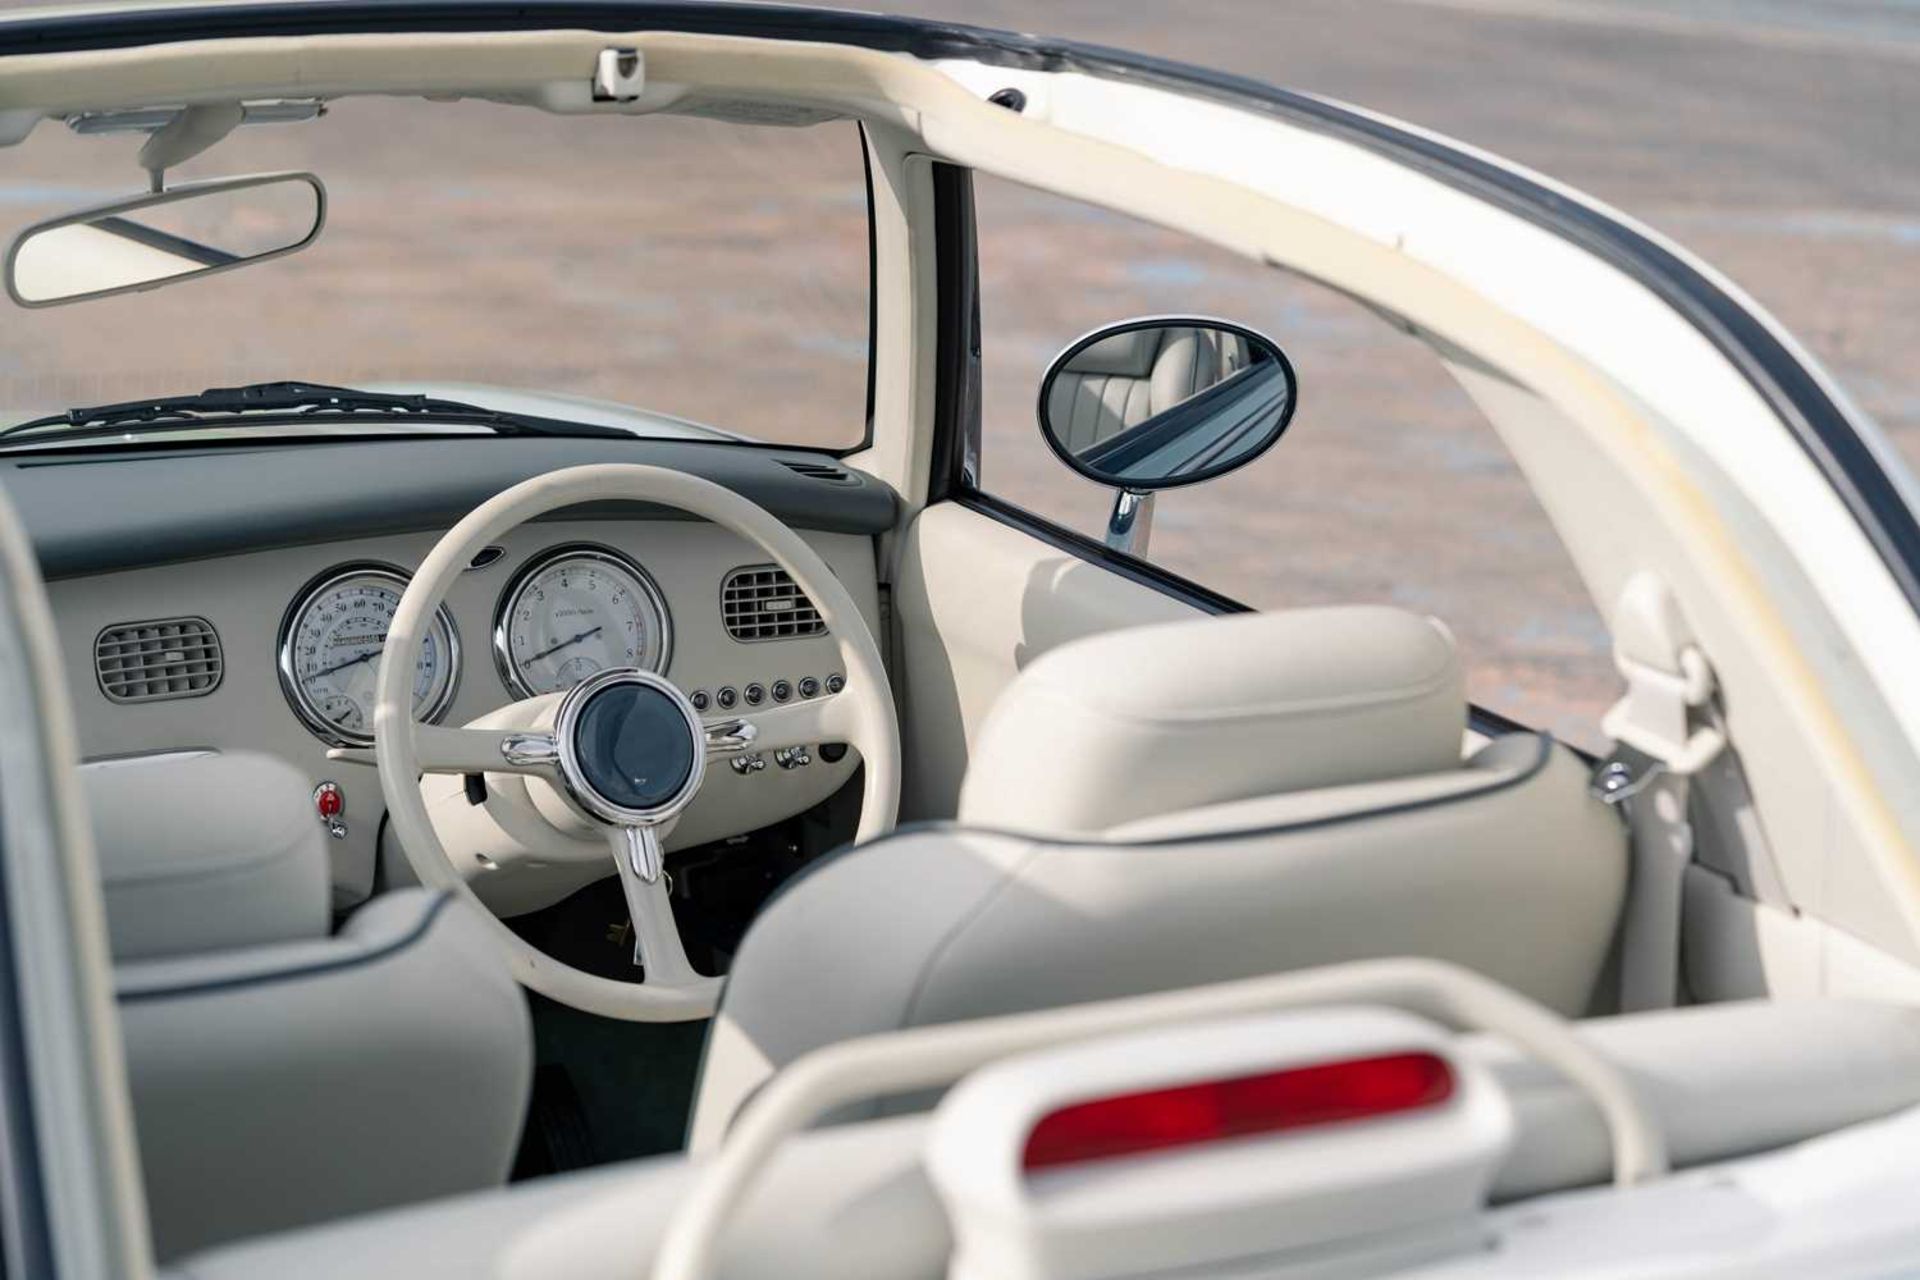 1991 Nissan Figaro ***NO RESERVE*** Timewarp, as-new example, displaying a credible 4,315 miles  - Image 52 of 64